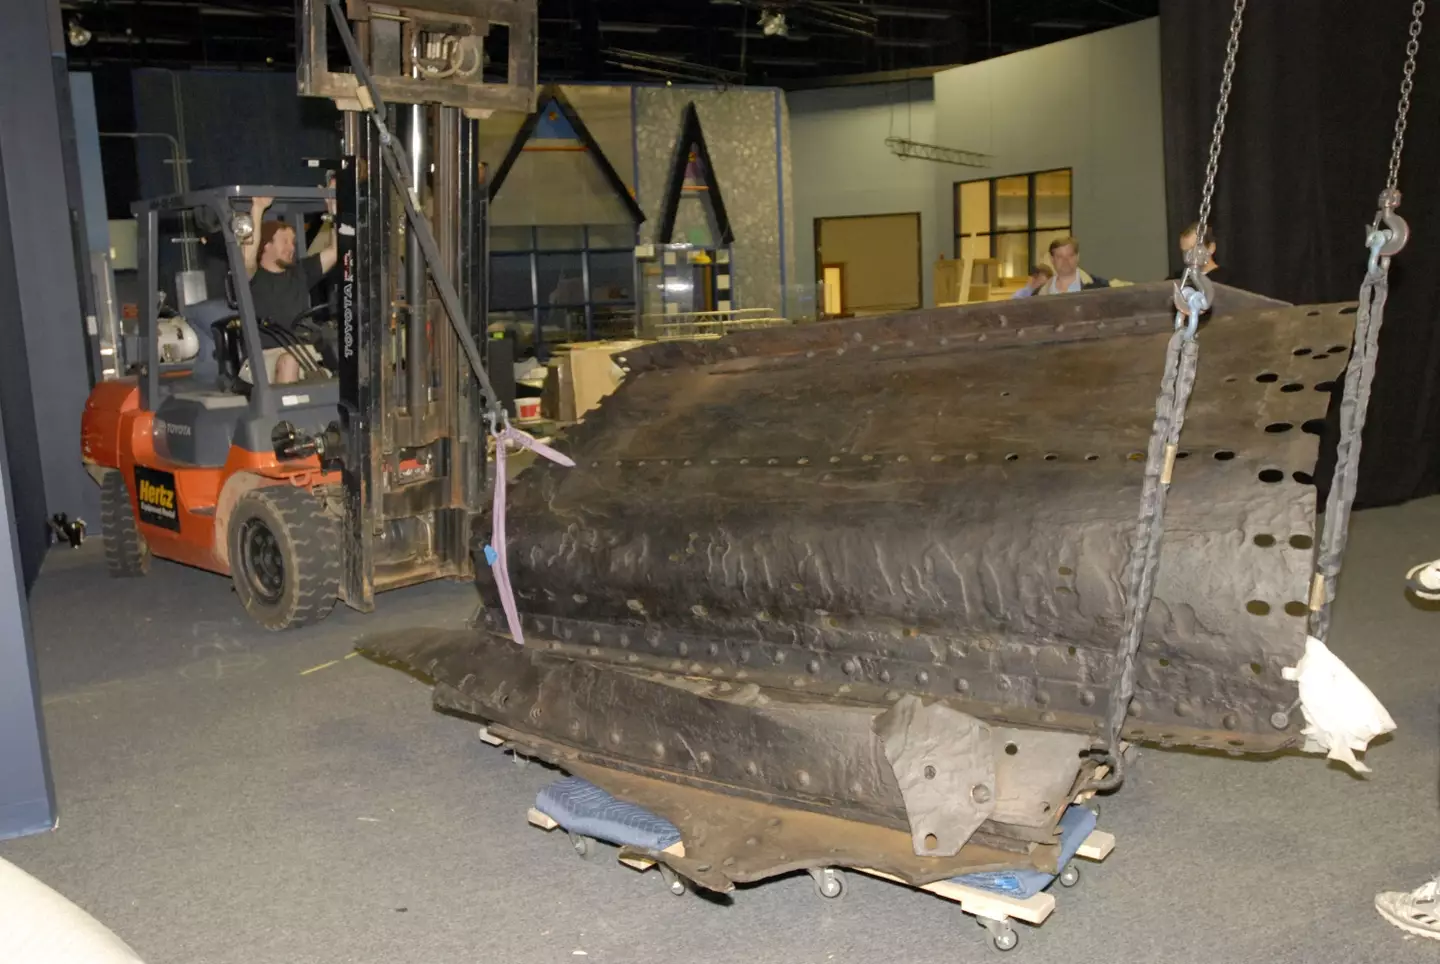 Over 5,500 artifacts have been removed from the shipwreck site, including part of the Titanic's hull.